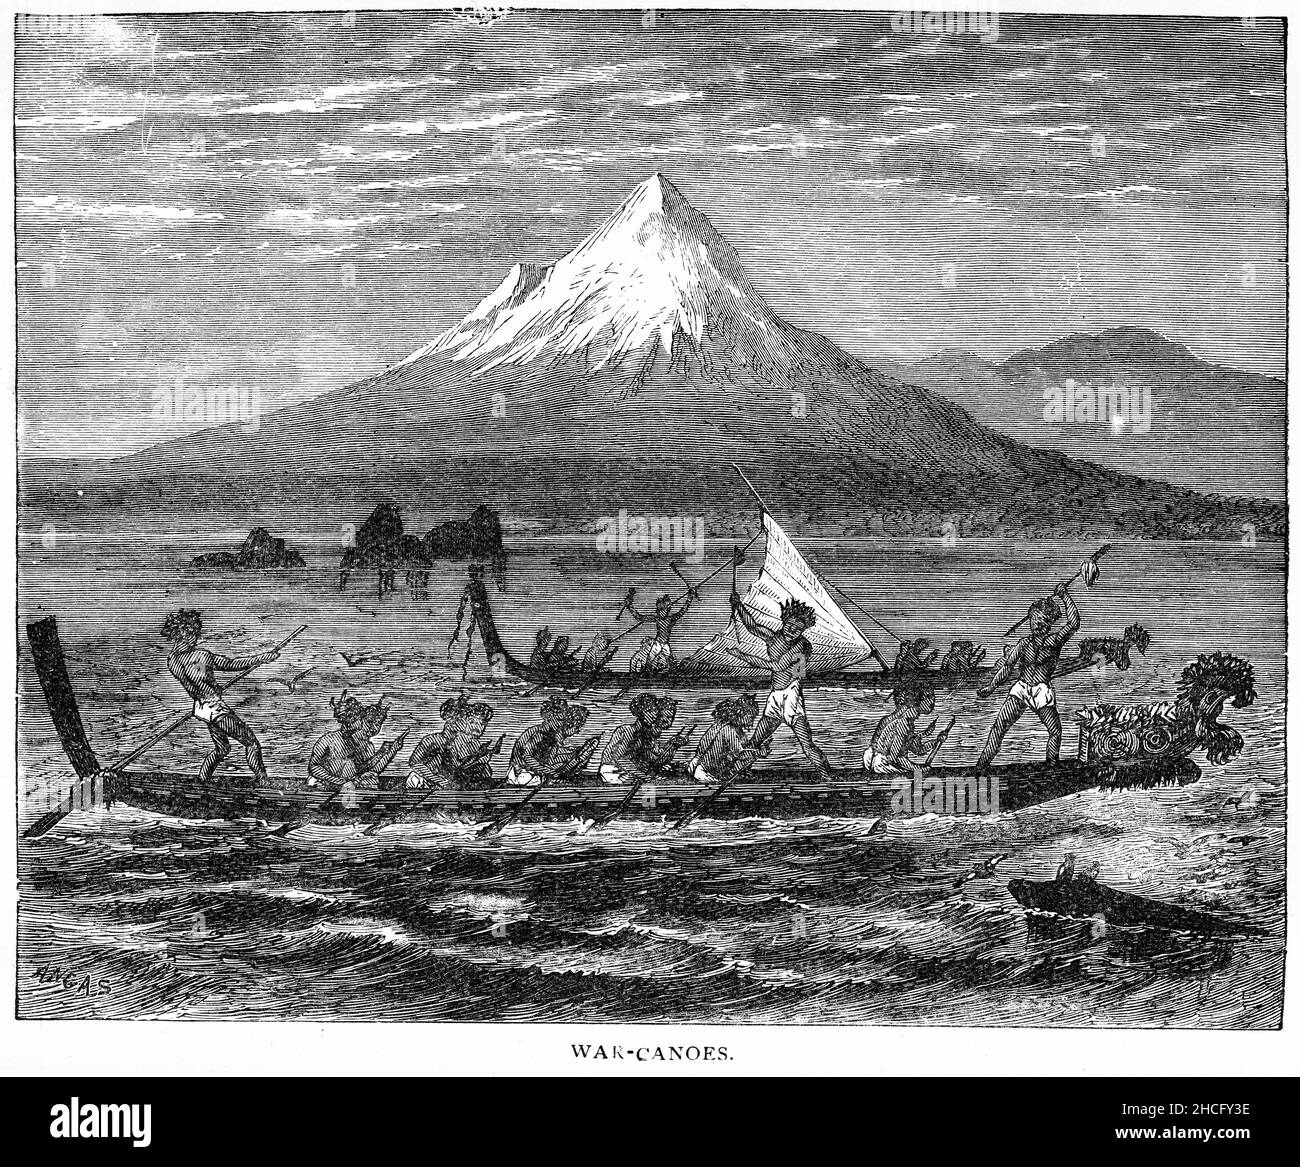 View of New Zealand Maori war canoes during one of Cook's expeditions of exploration in the late 1700s, published circa 1900 Stock Photo